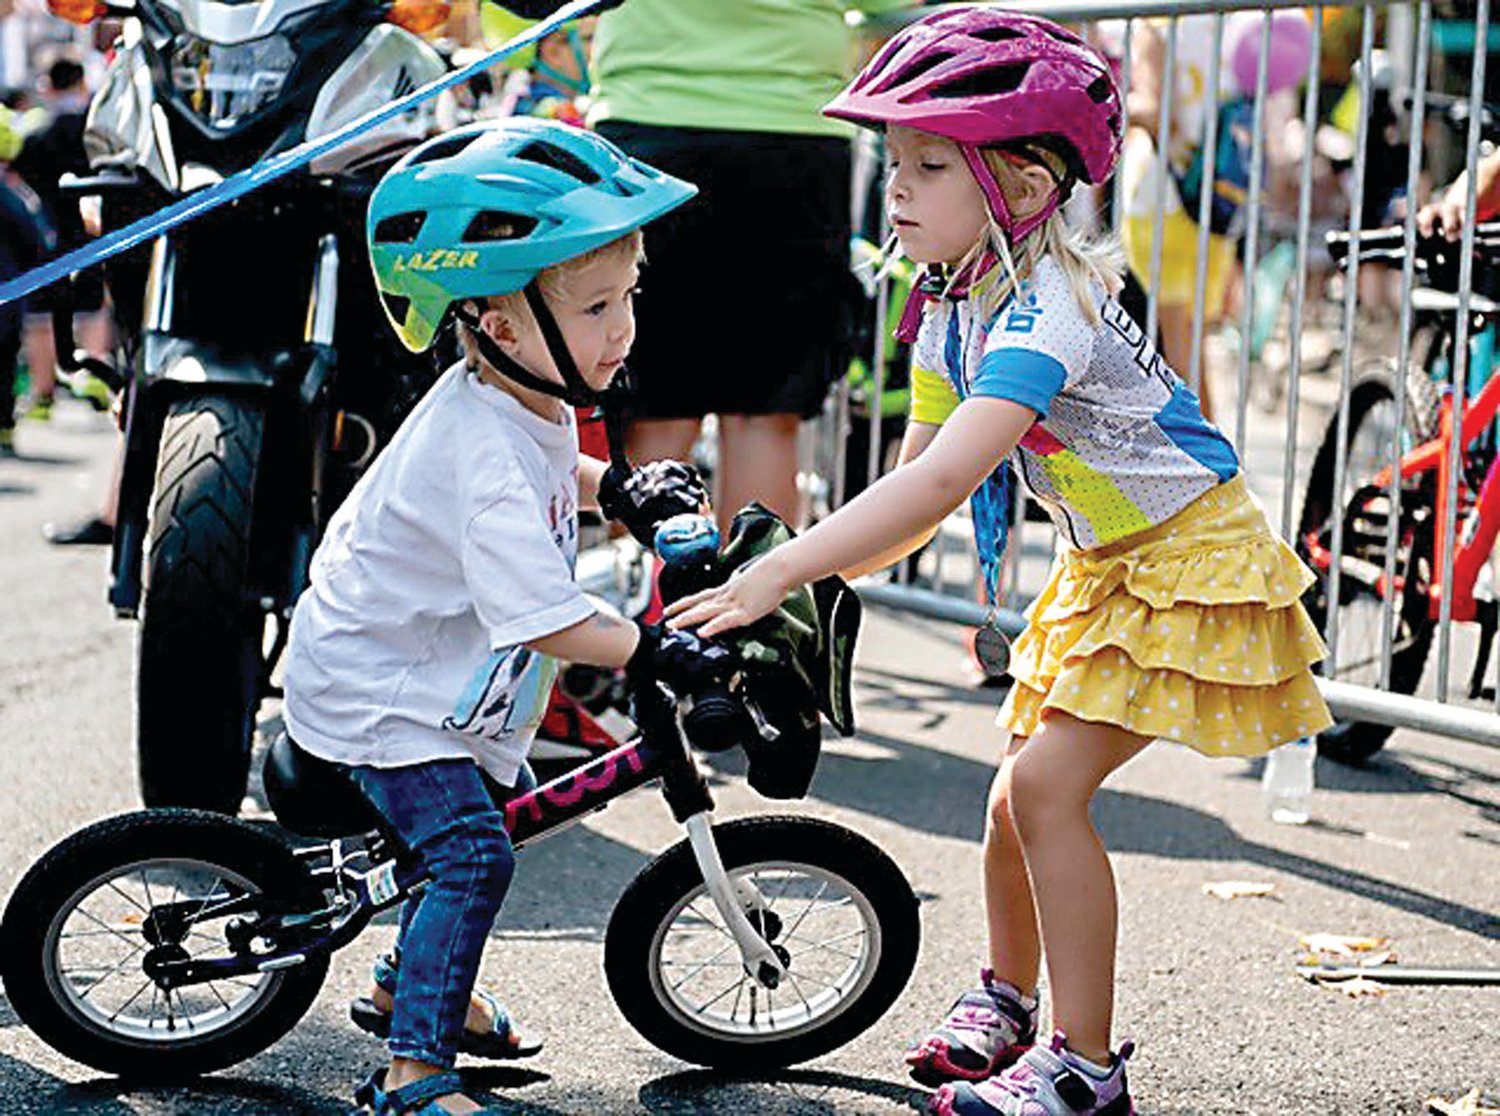 Scout Melby helps her little brother, Elliot Melby, after he fell off his bike.